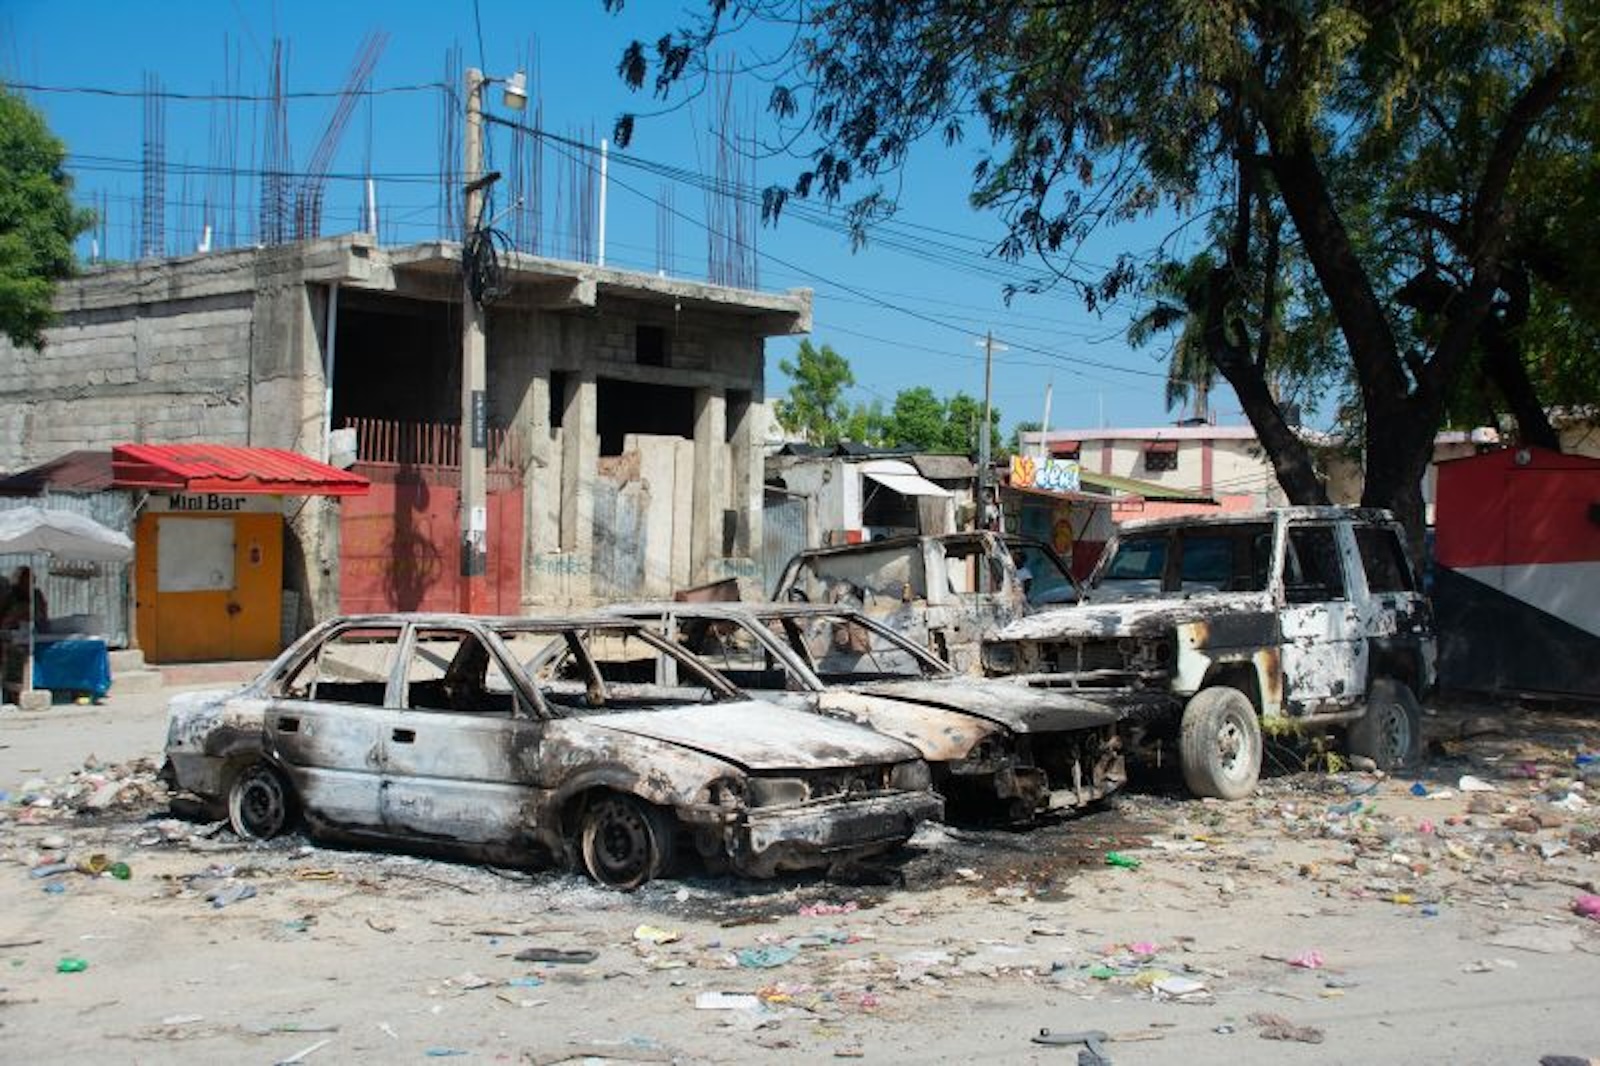 What is happening in Haiti?  Day by day, this happened during the recent spate of violence in the country